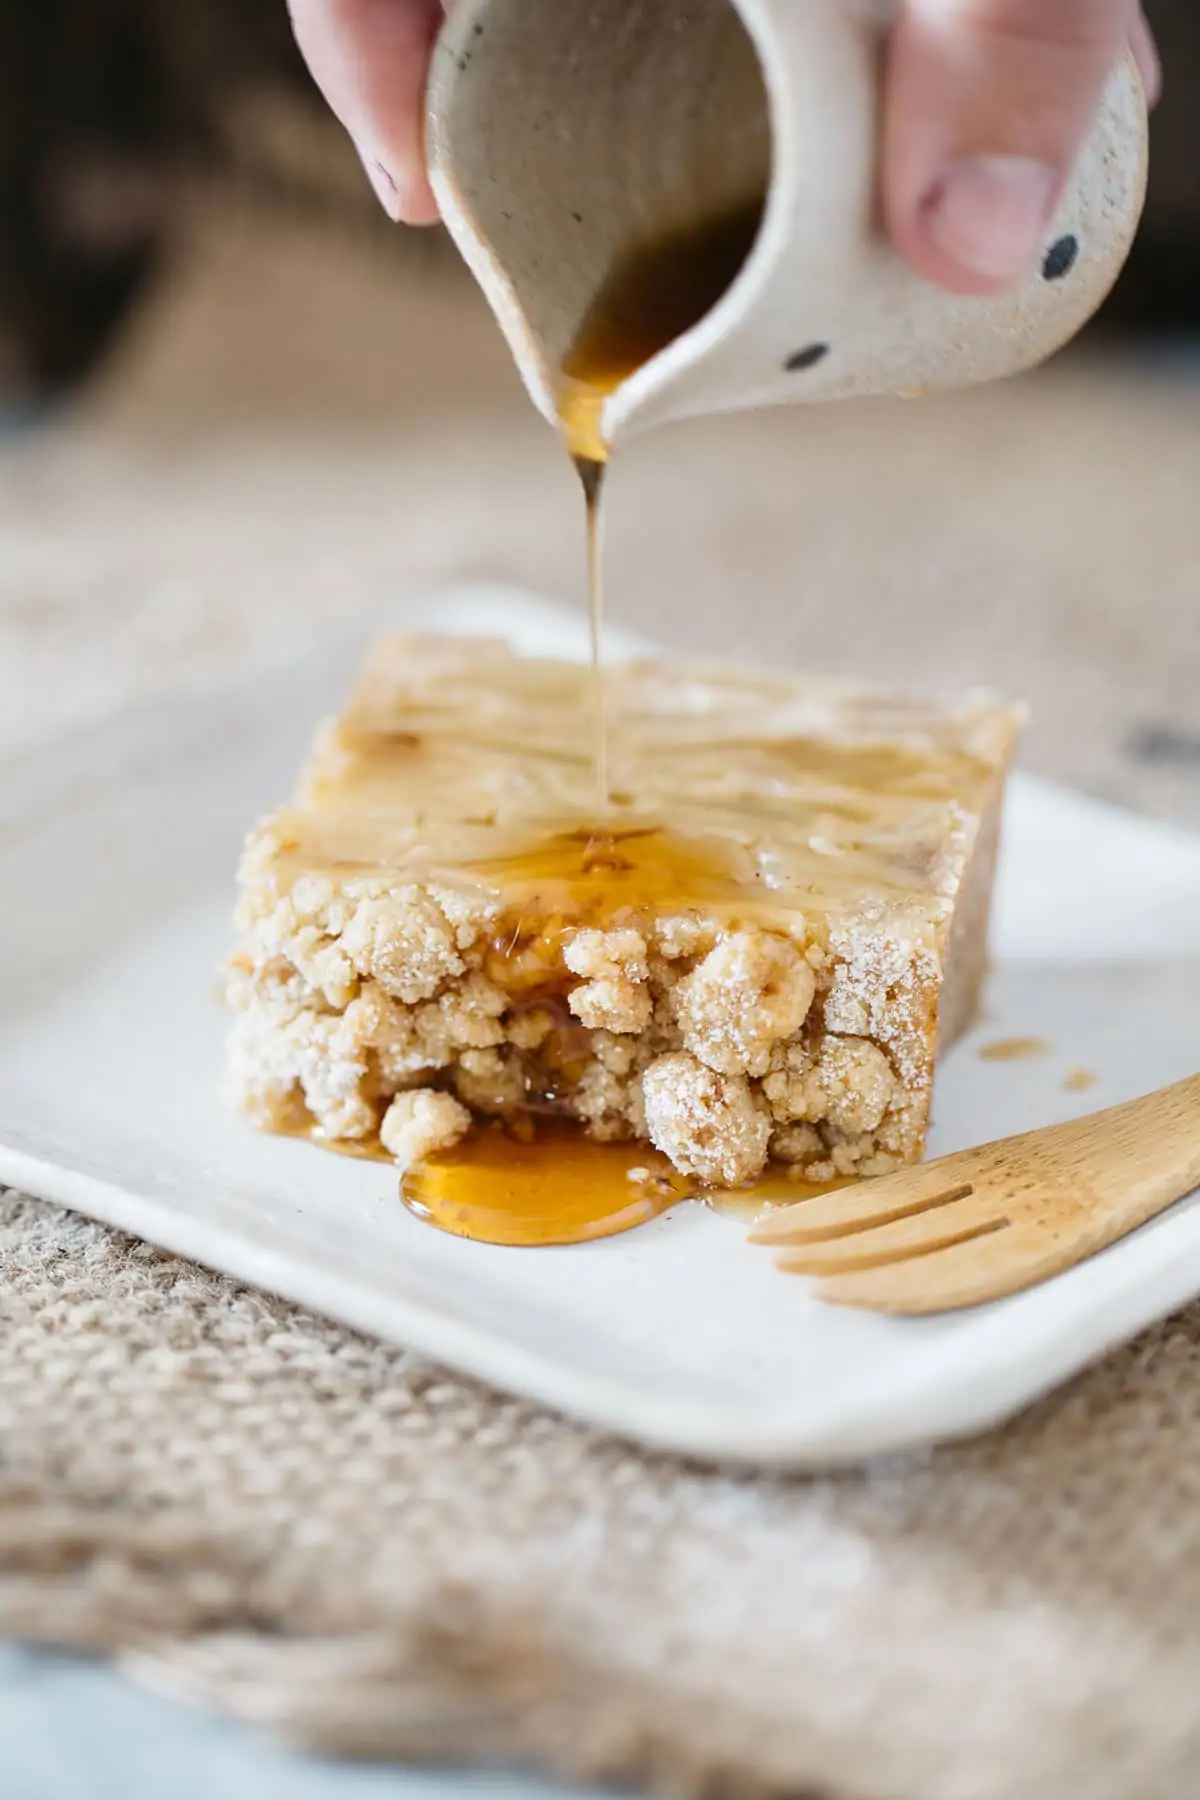 maple syrup poured over invisible apple crumble cake